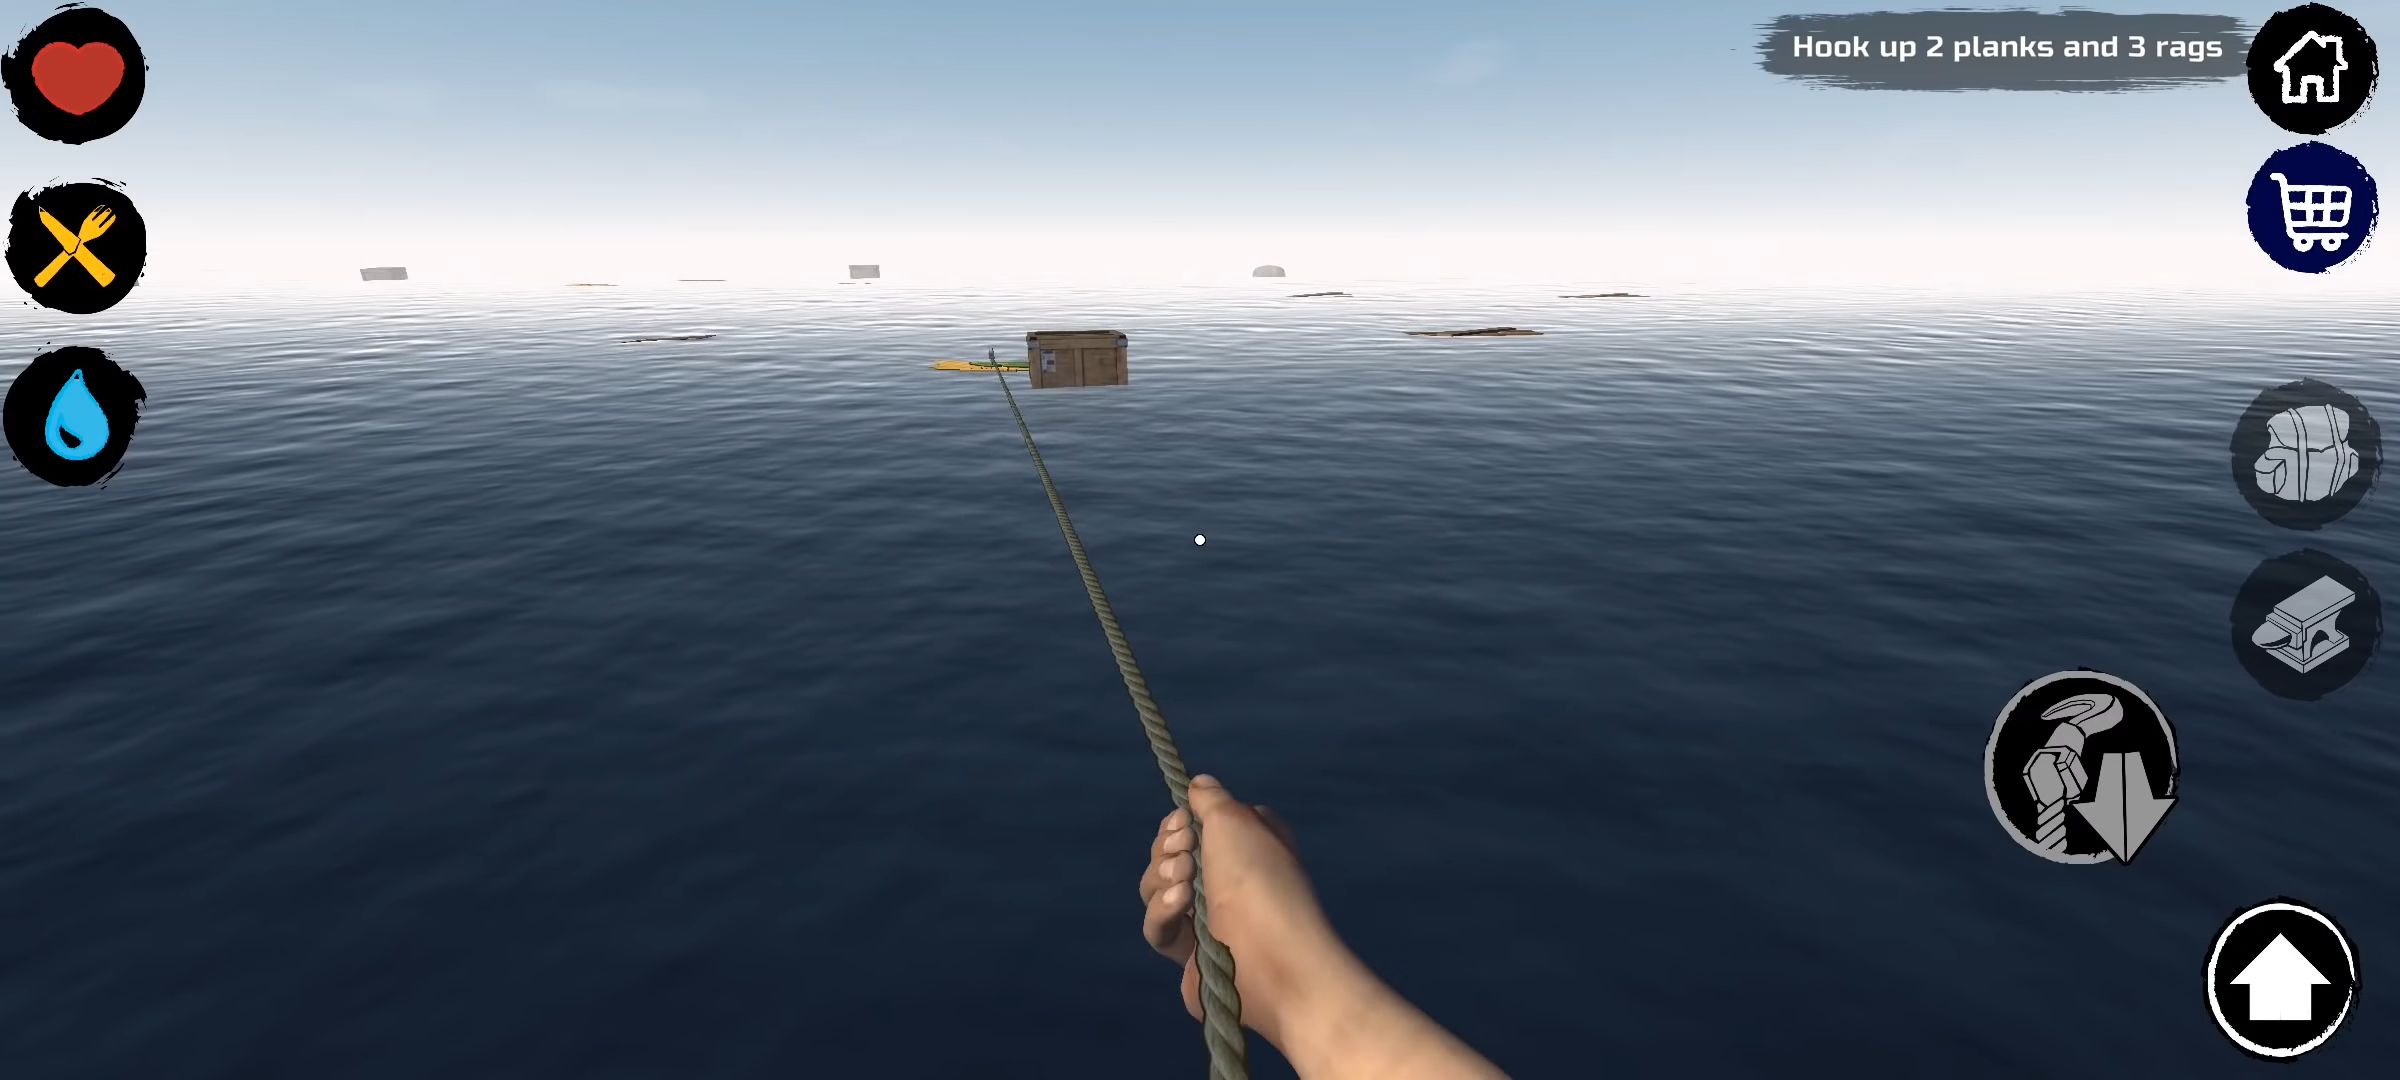 Survival and Craft: Crafting In The Ocean - Android game screenshots.